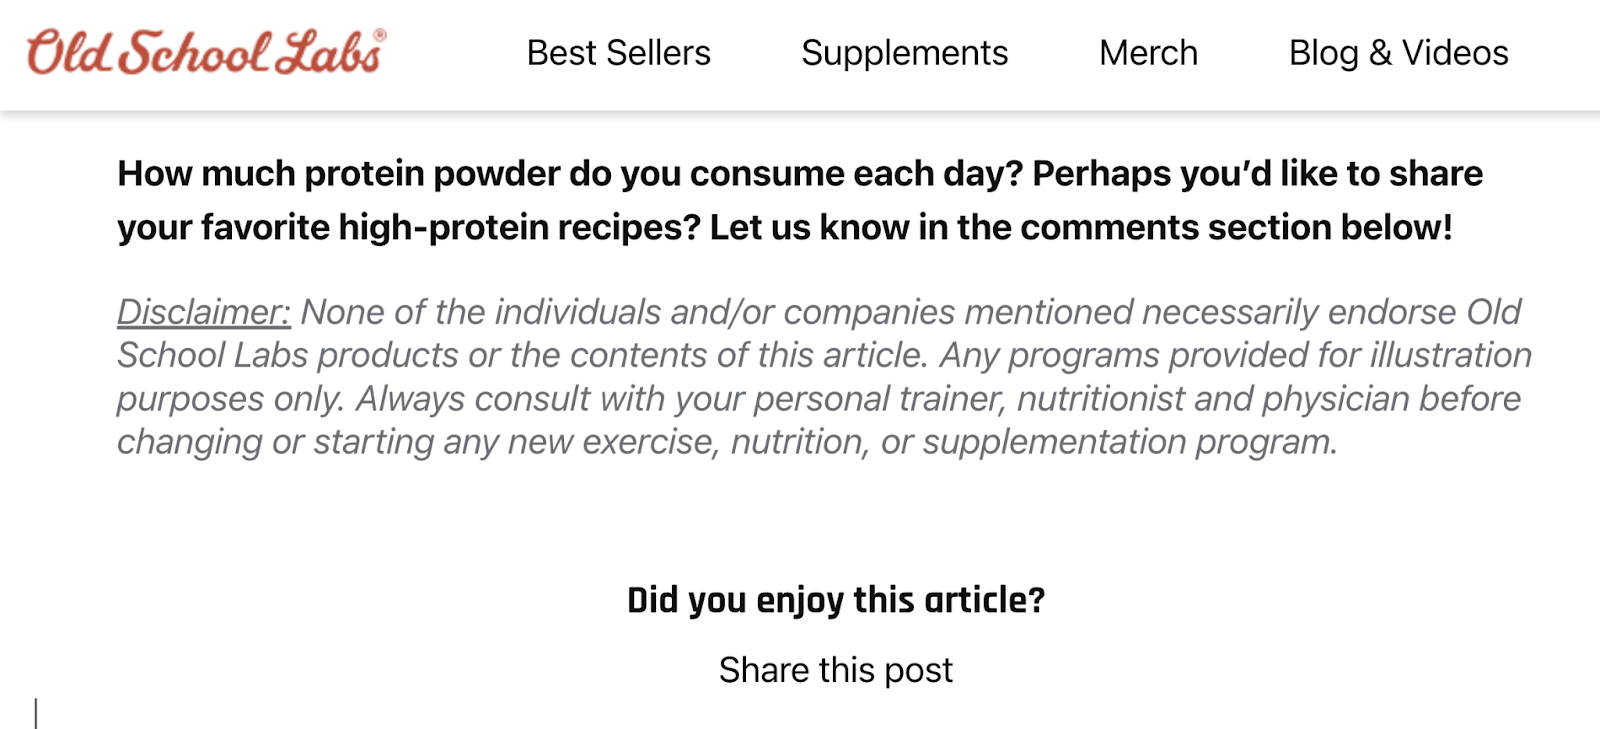 A conclusion of blog post from Old School Labs about protein powders